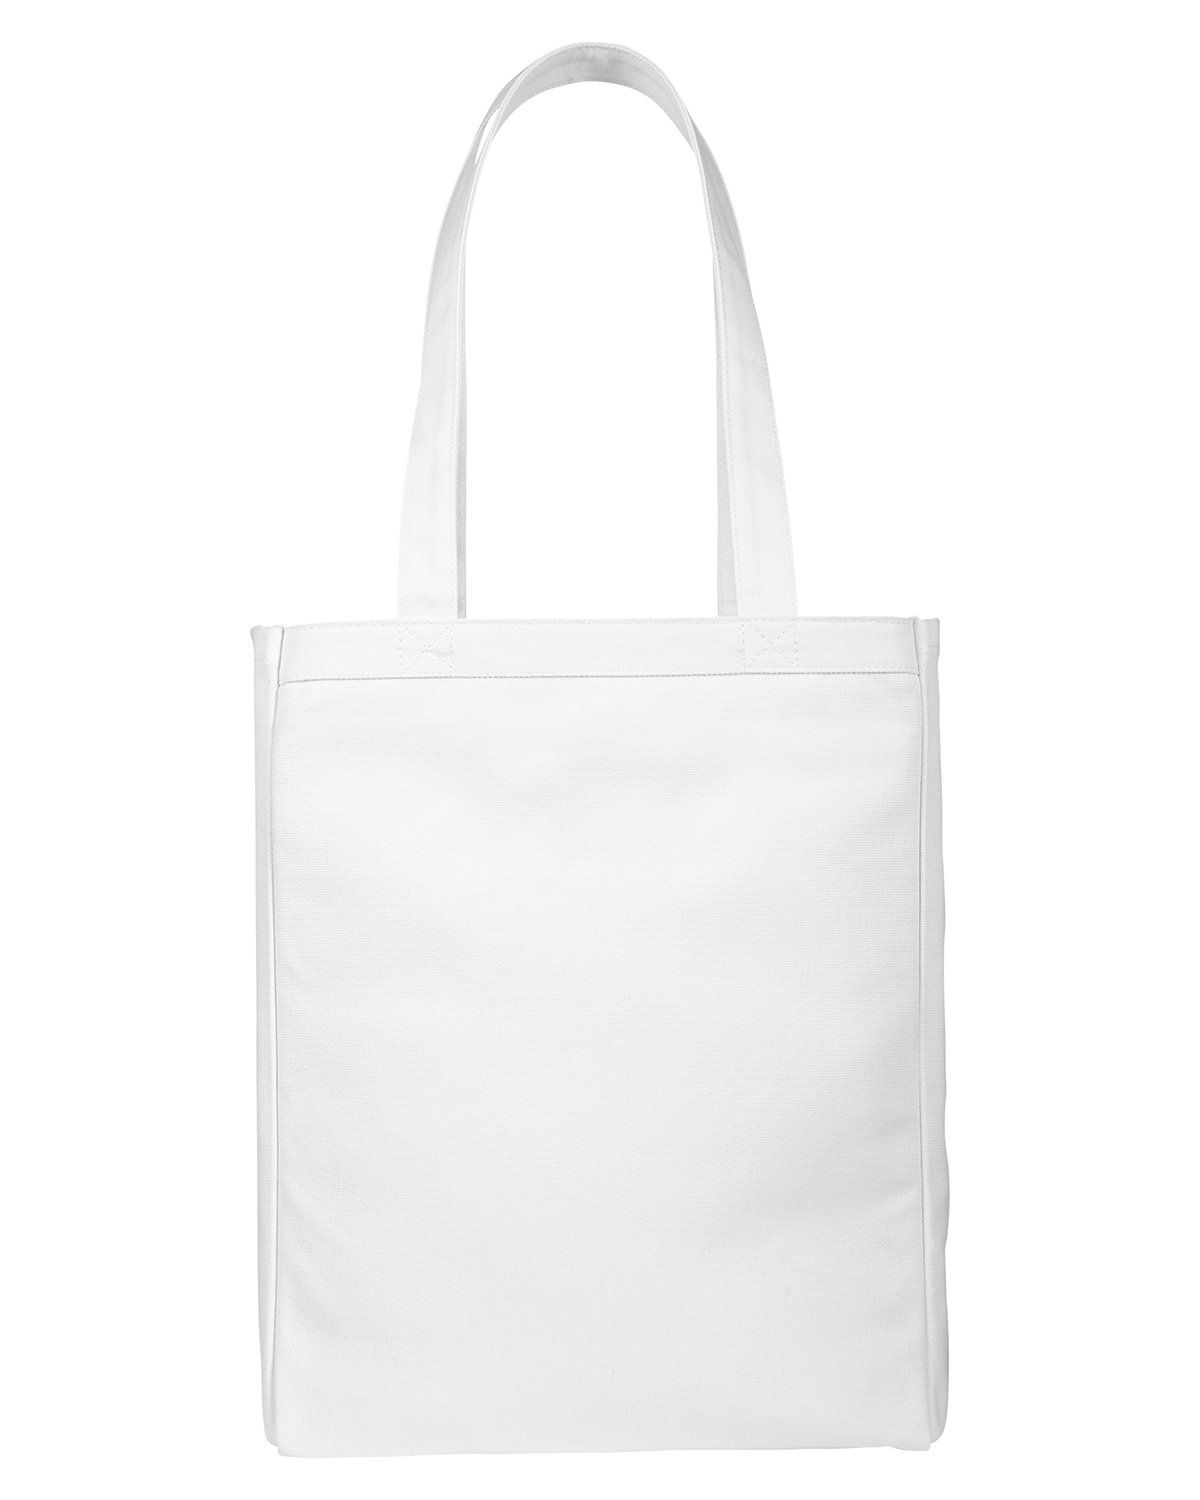 'BAGedge BE008 12 Oz. Canvas Book Tote'